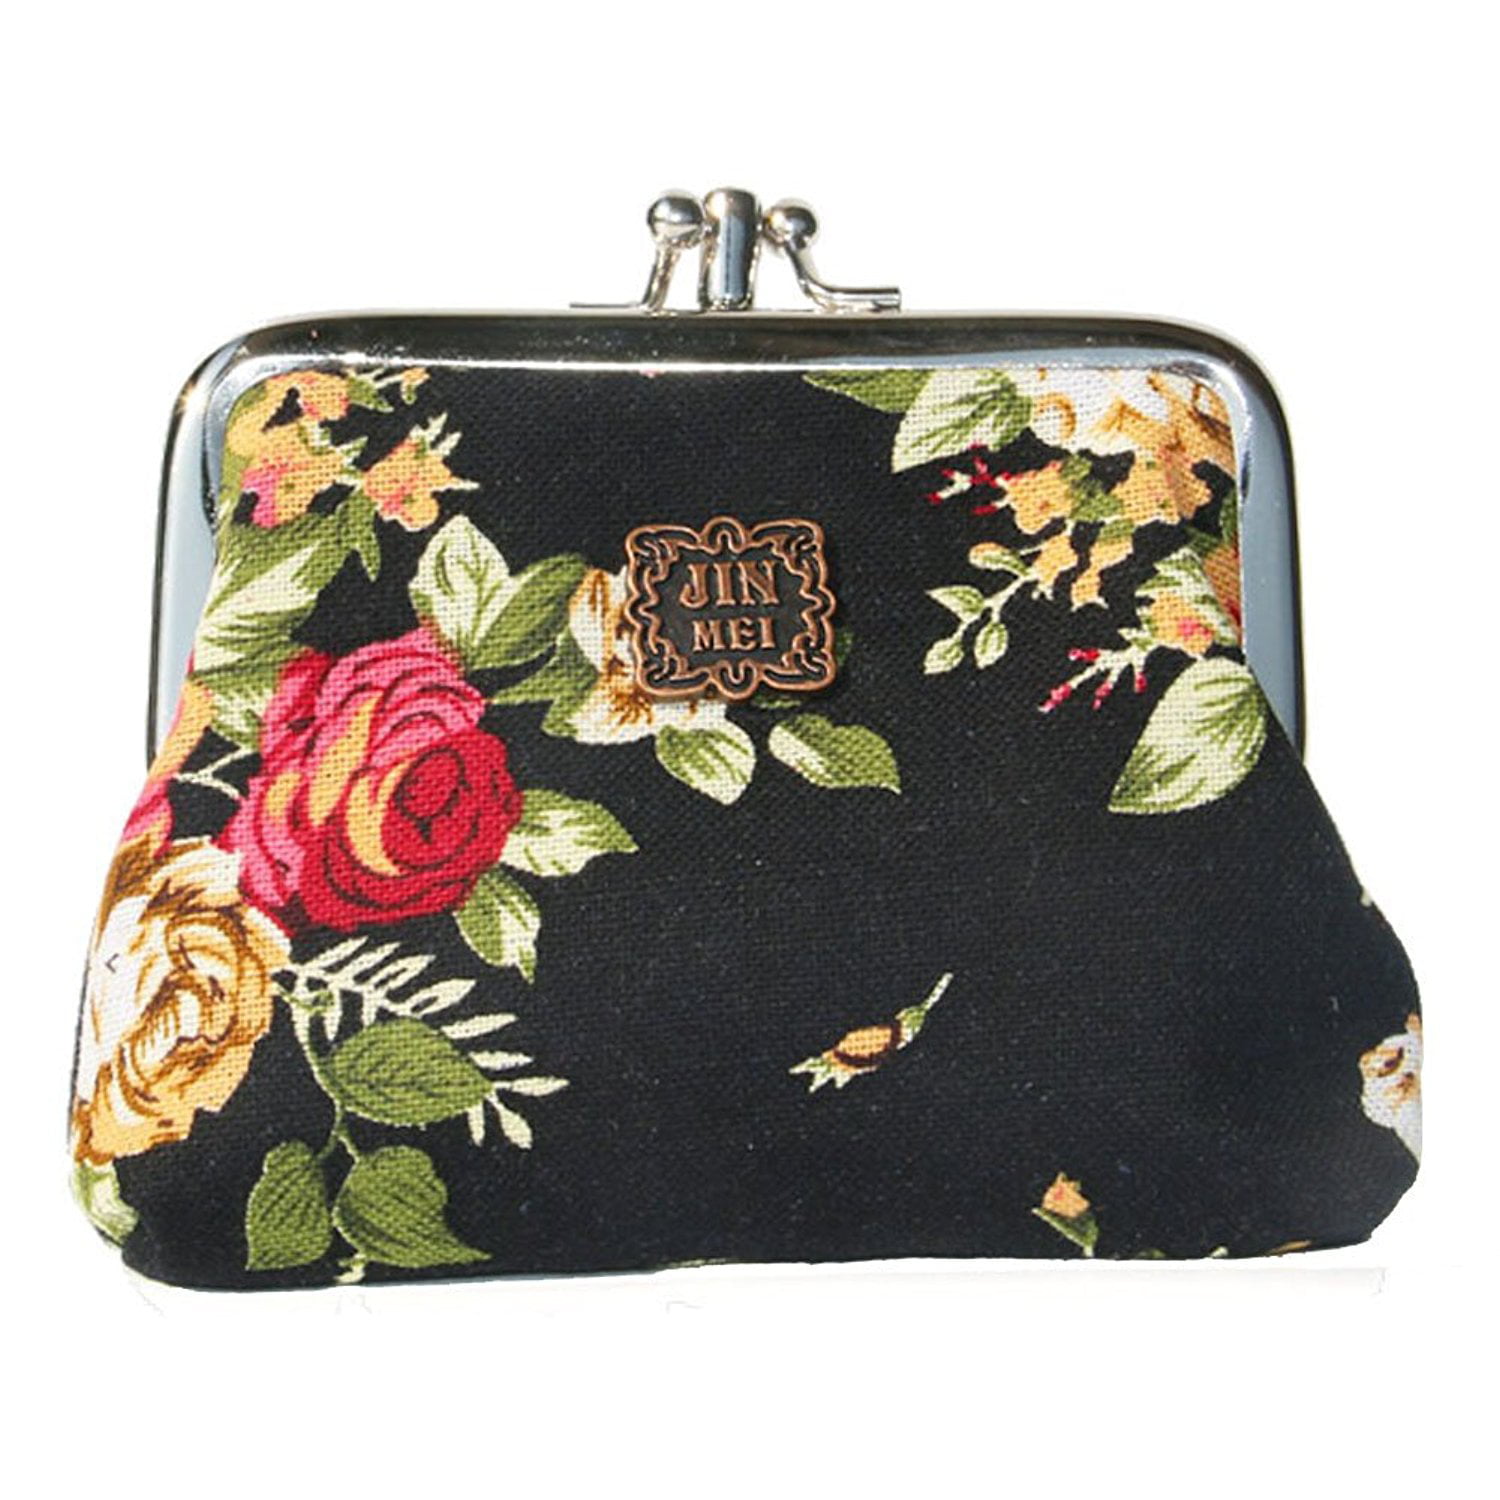 Bunny Rabbit Floral Flower Coin Purse Buckle Vintage PU Pouch Kiss-lock Wallet for Women Girl